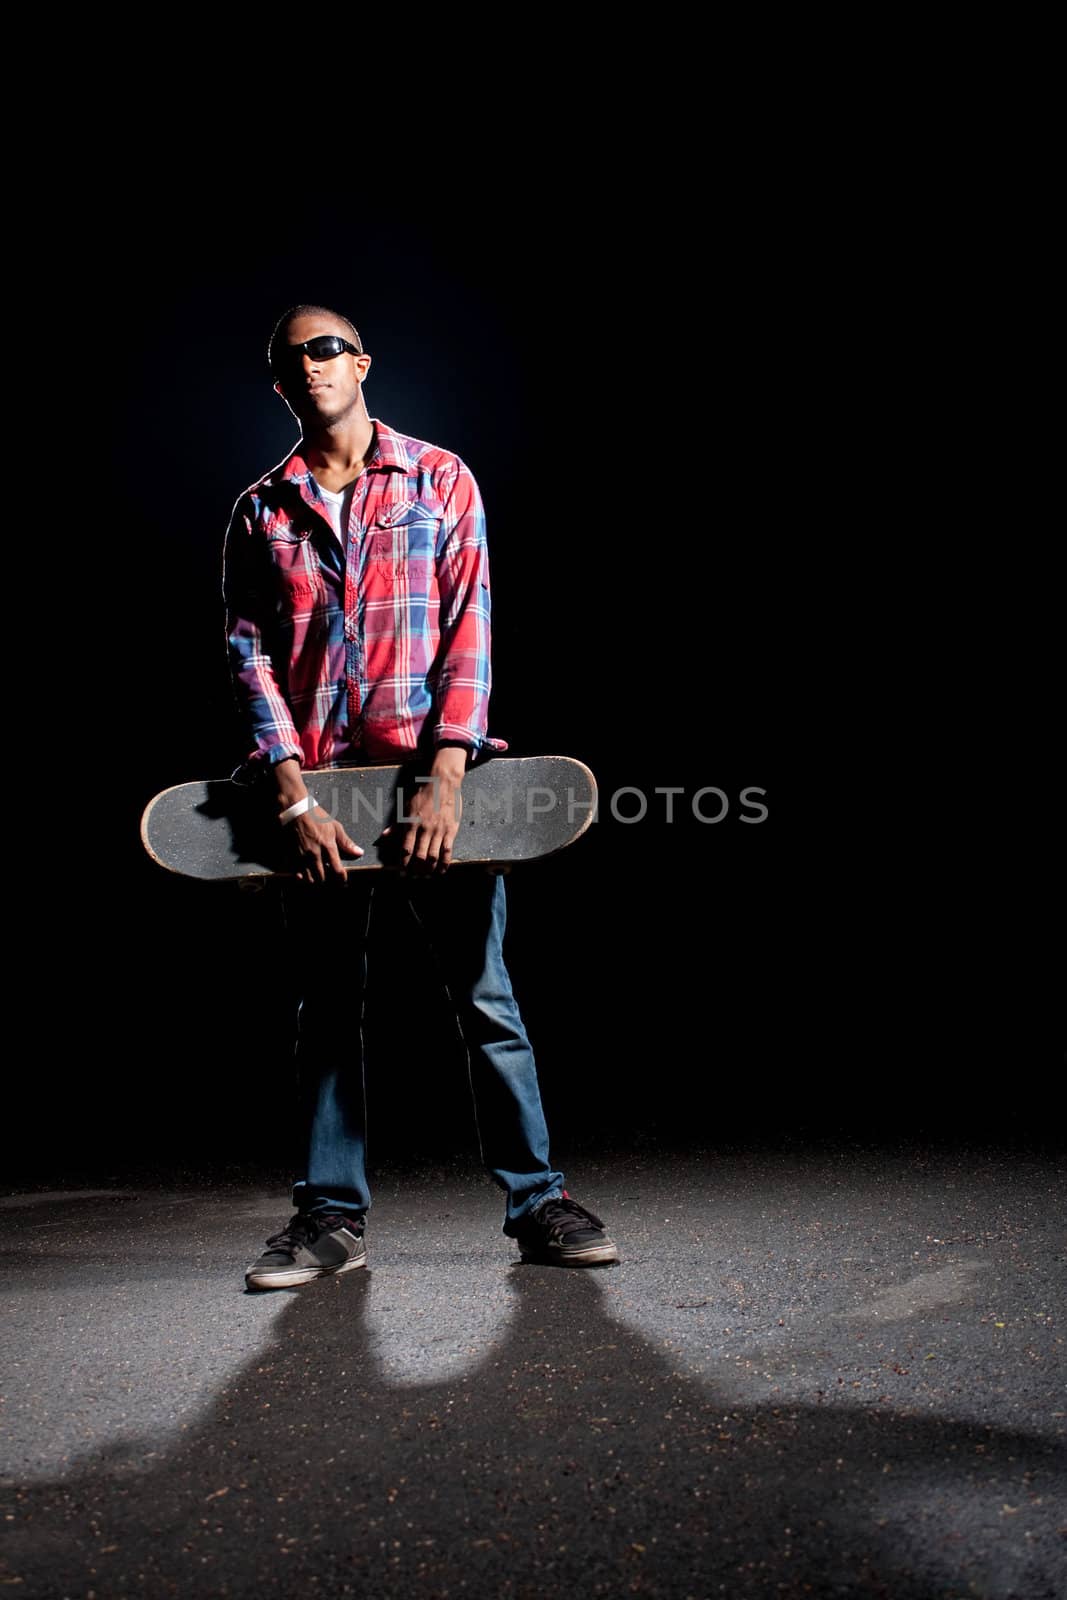 African American skateboarder wearing sunglasses holding his skateboard under dramatic lighting with dramatic shadows.  